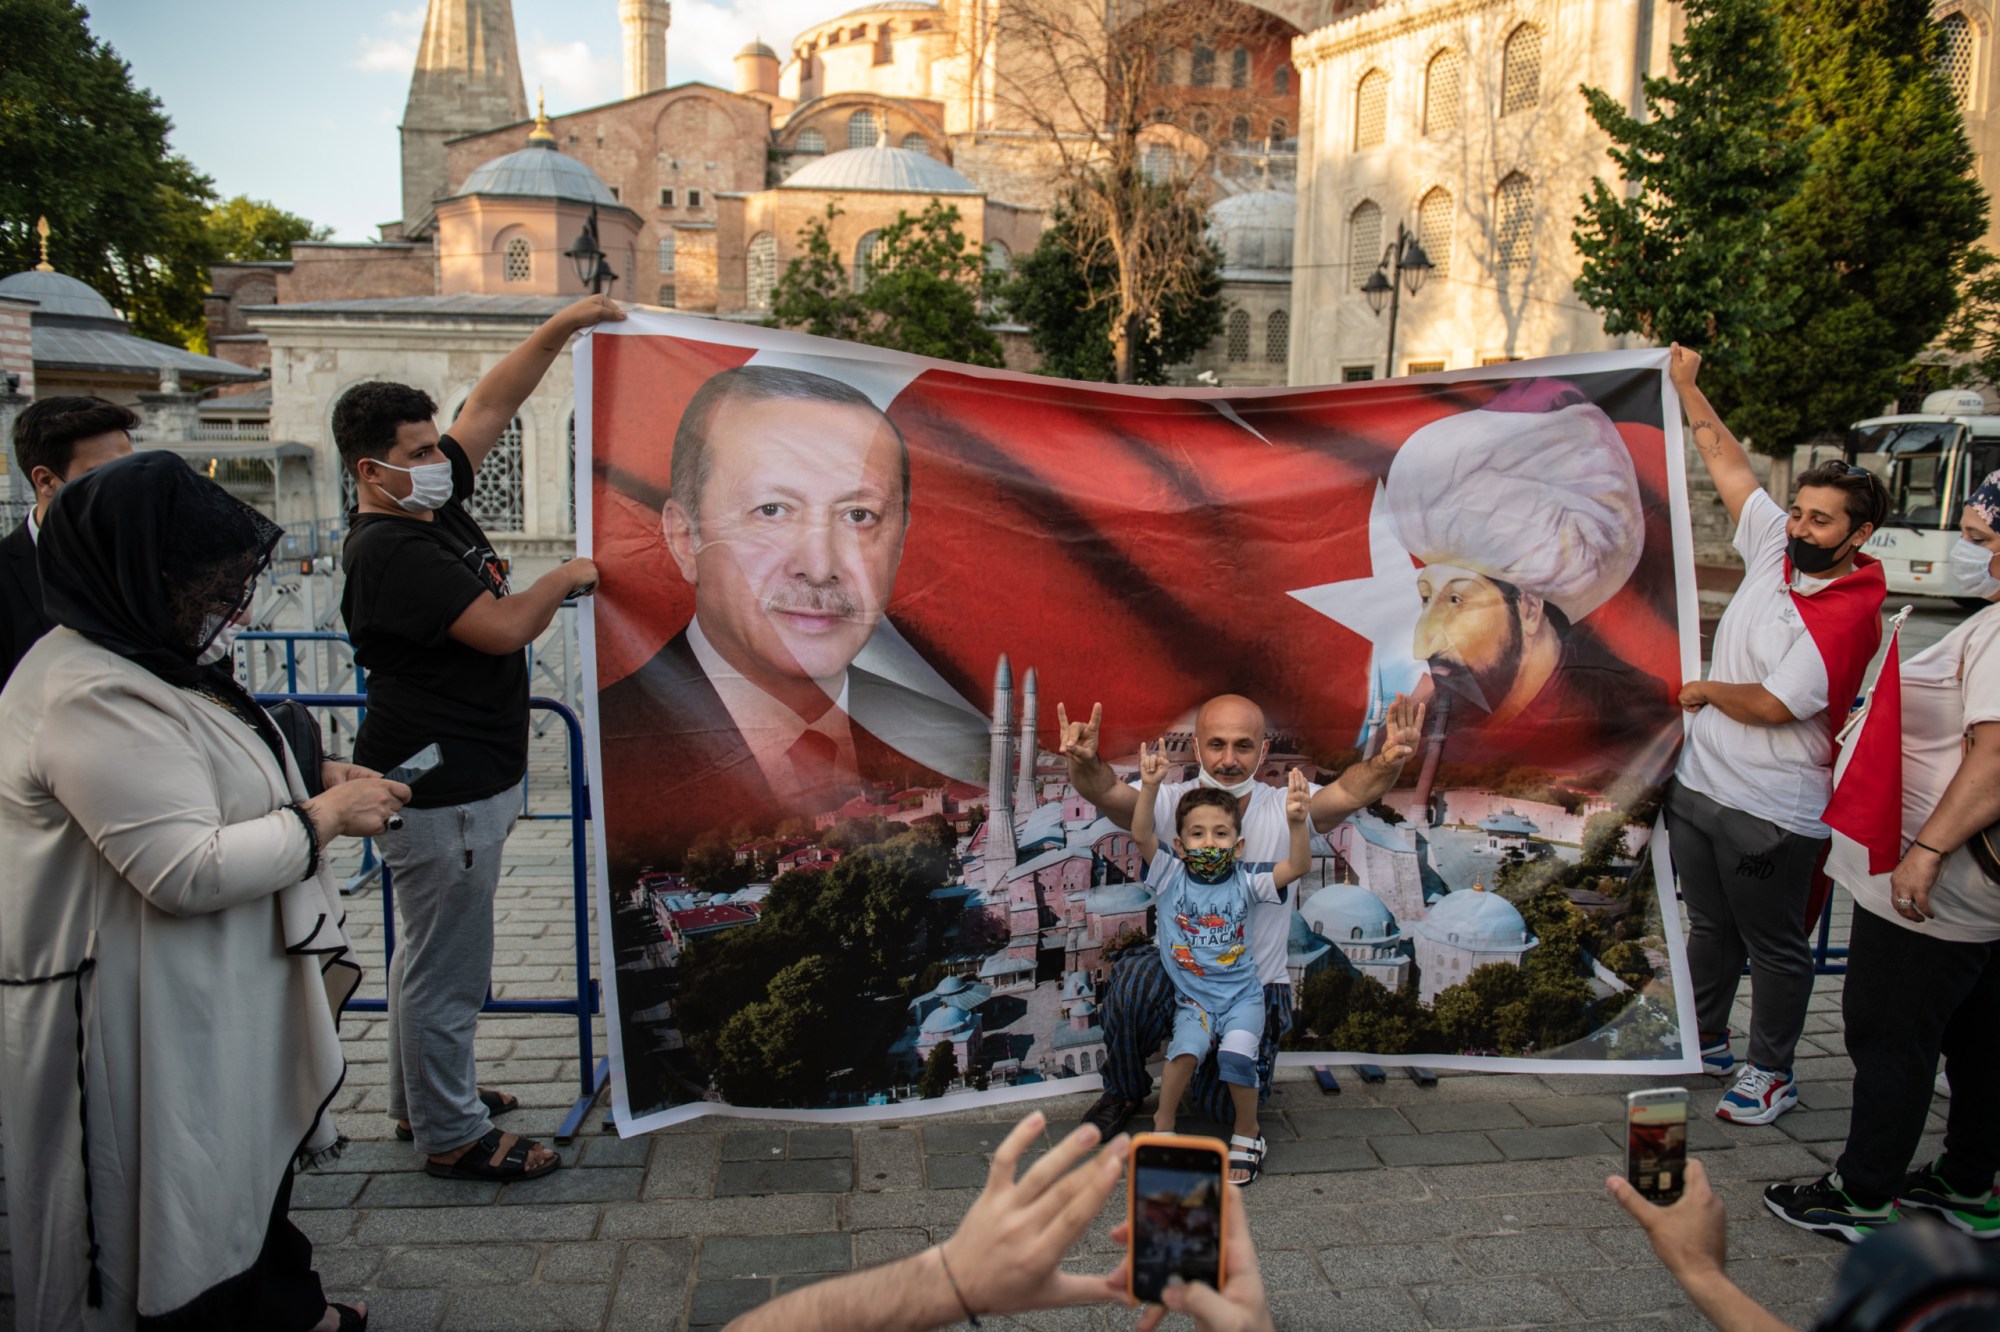 ISTANBUL, TURKEY - JULY 10: A man and a boy gesture in front of a placard depicting Turkish President Tayyip Erdogan and Ottoman Sultan Mehmet II, also known as Mehmet the Conqueror, outside Istanbul's famous Hagia Sophia on July 10, 2020 in Istanbul, Turkey. Turkey's top administrative court ruled to annul a 1934 decree that turned the historic Hagia Sophia into a museum. The controversial ruling opens the way for the structure to be converted back into a mosque after 85 years. President Recep Tayyip Erdoğan handed over the iconic structure’s control to the country’s Religious Affairs Directorate following a court ruling revoking its status as a museum. President Erdogan said that the government will open Istanbul’s Hagia Sophia for worship on July 24.  (Photo by Burak Kara/Getty Images)